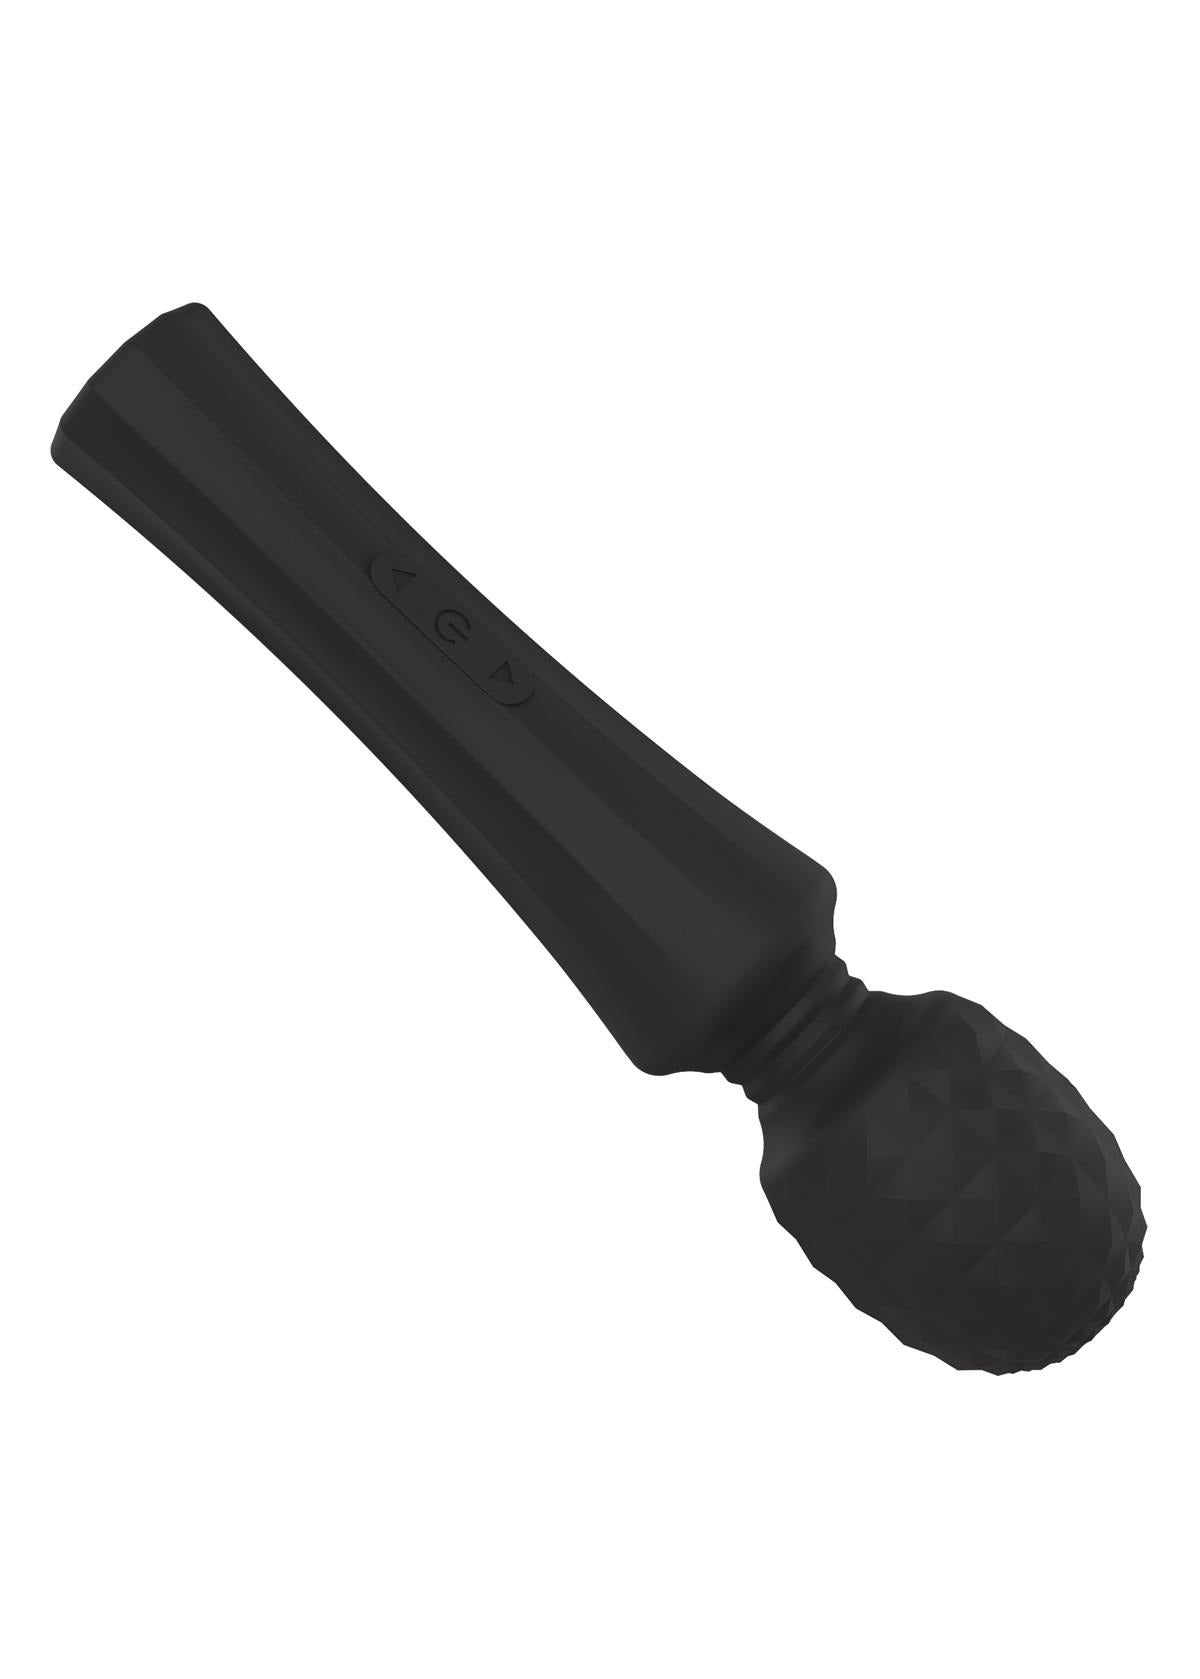 Bossoftoys - 22-00031 - Power wand Massager - Rechargeable - Silicone - 10 Function - Black- Colour Box